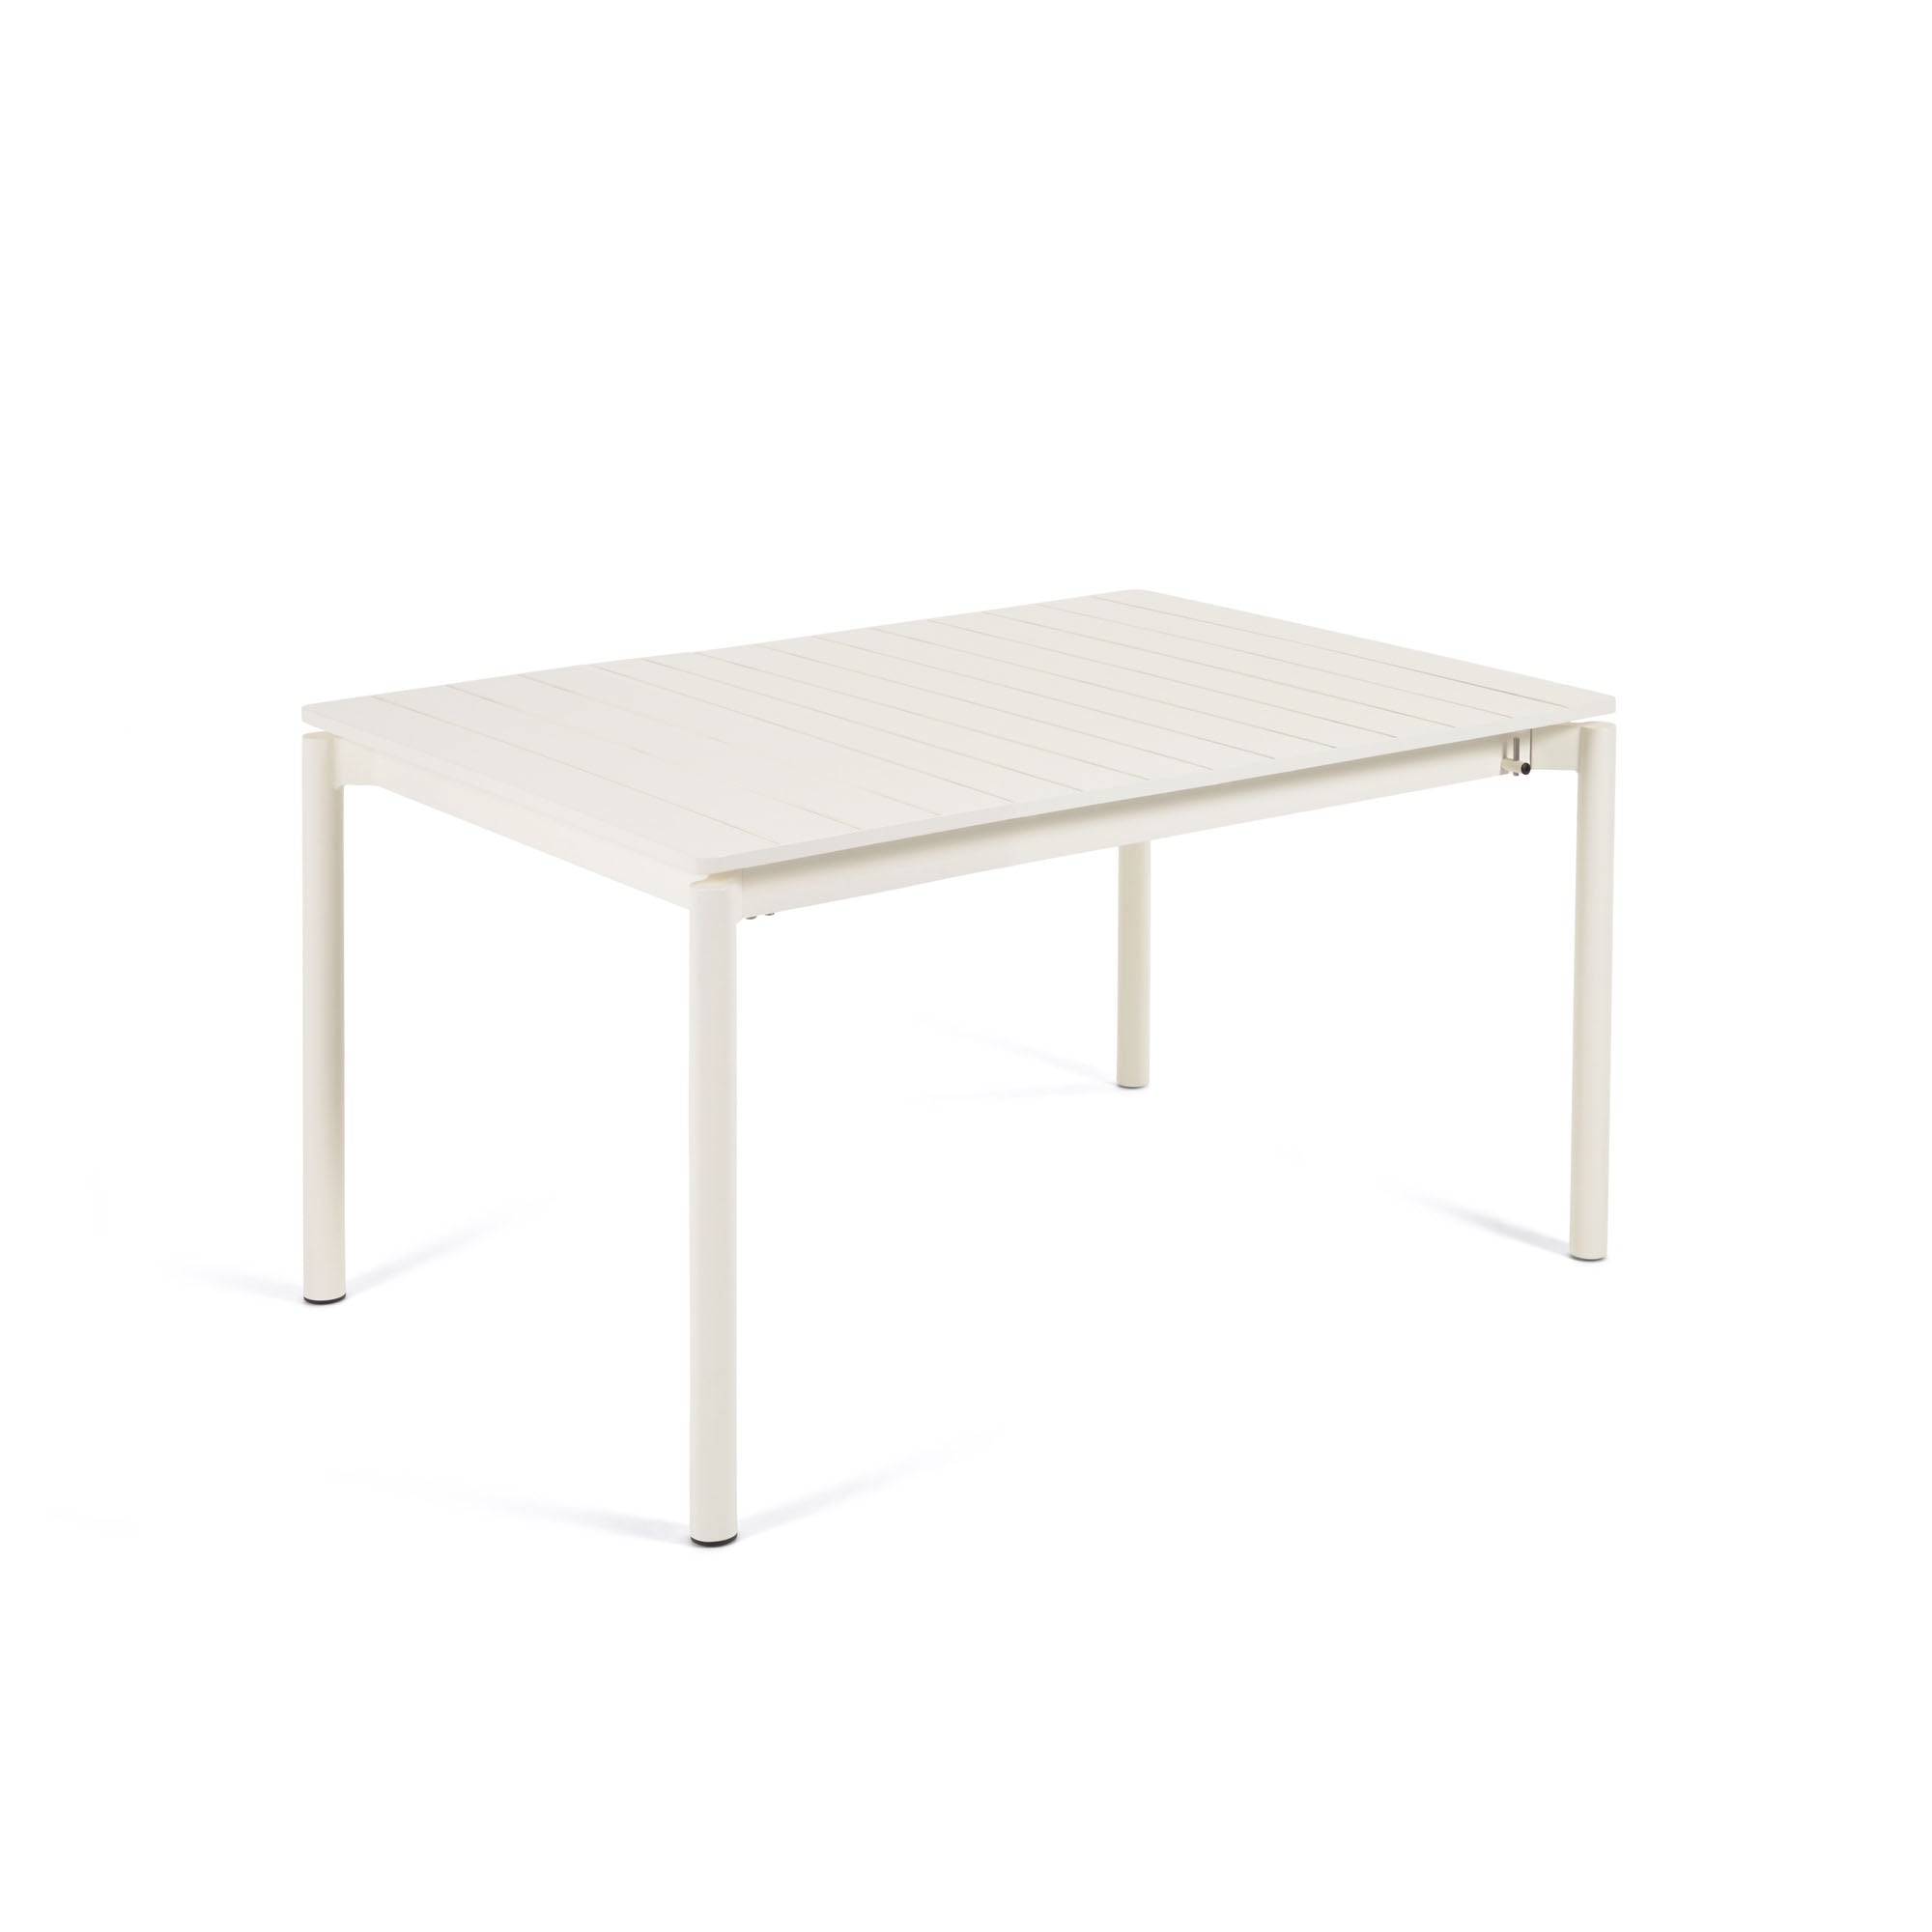 Zaltana extendable outdoor table in aluminum with raw finish, 140 (200) x 100 cm